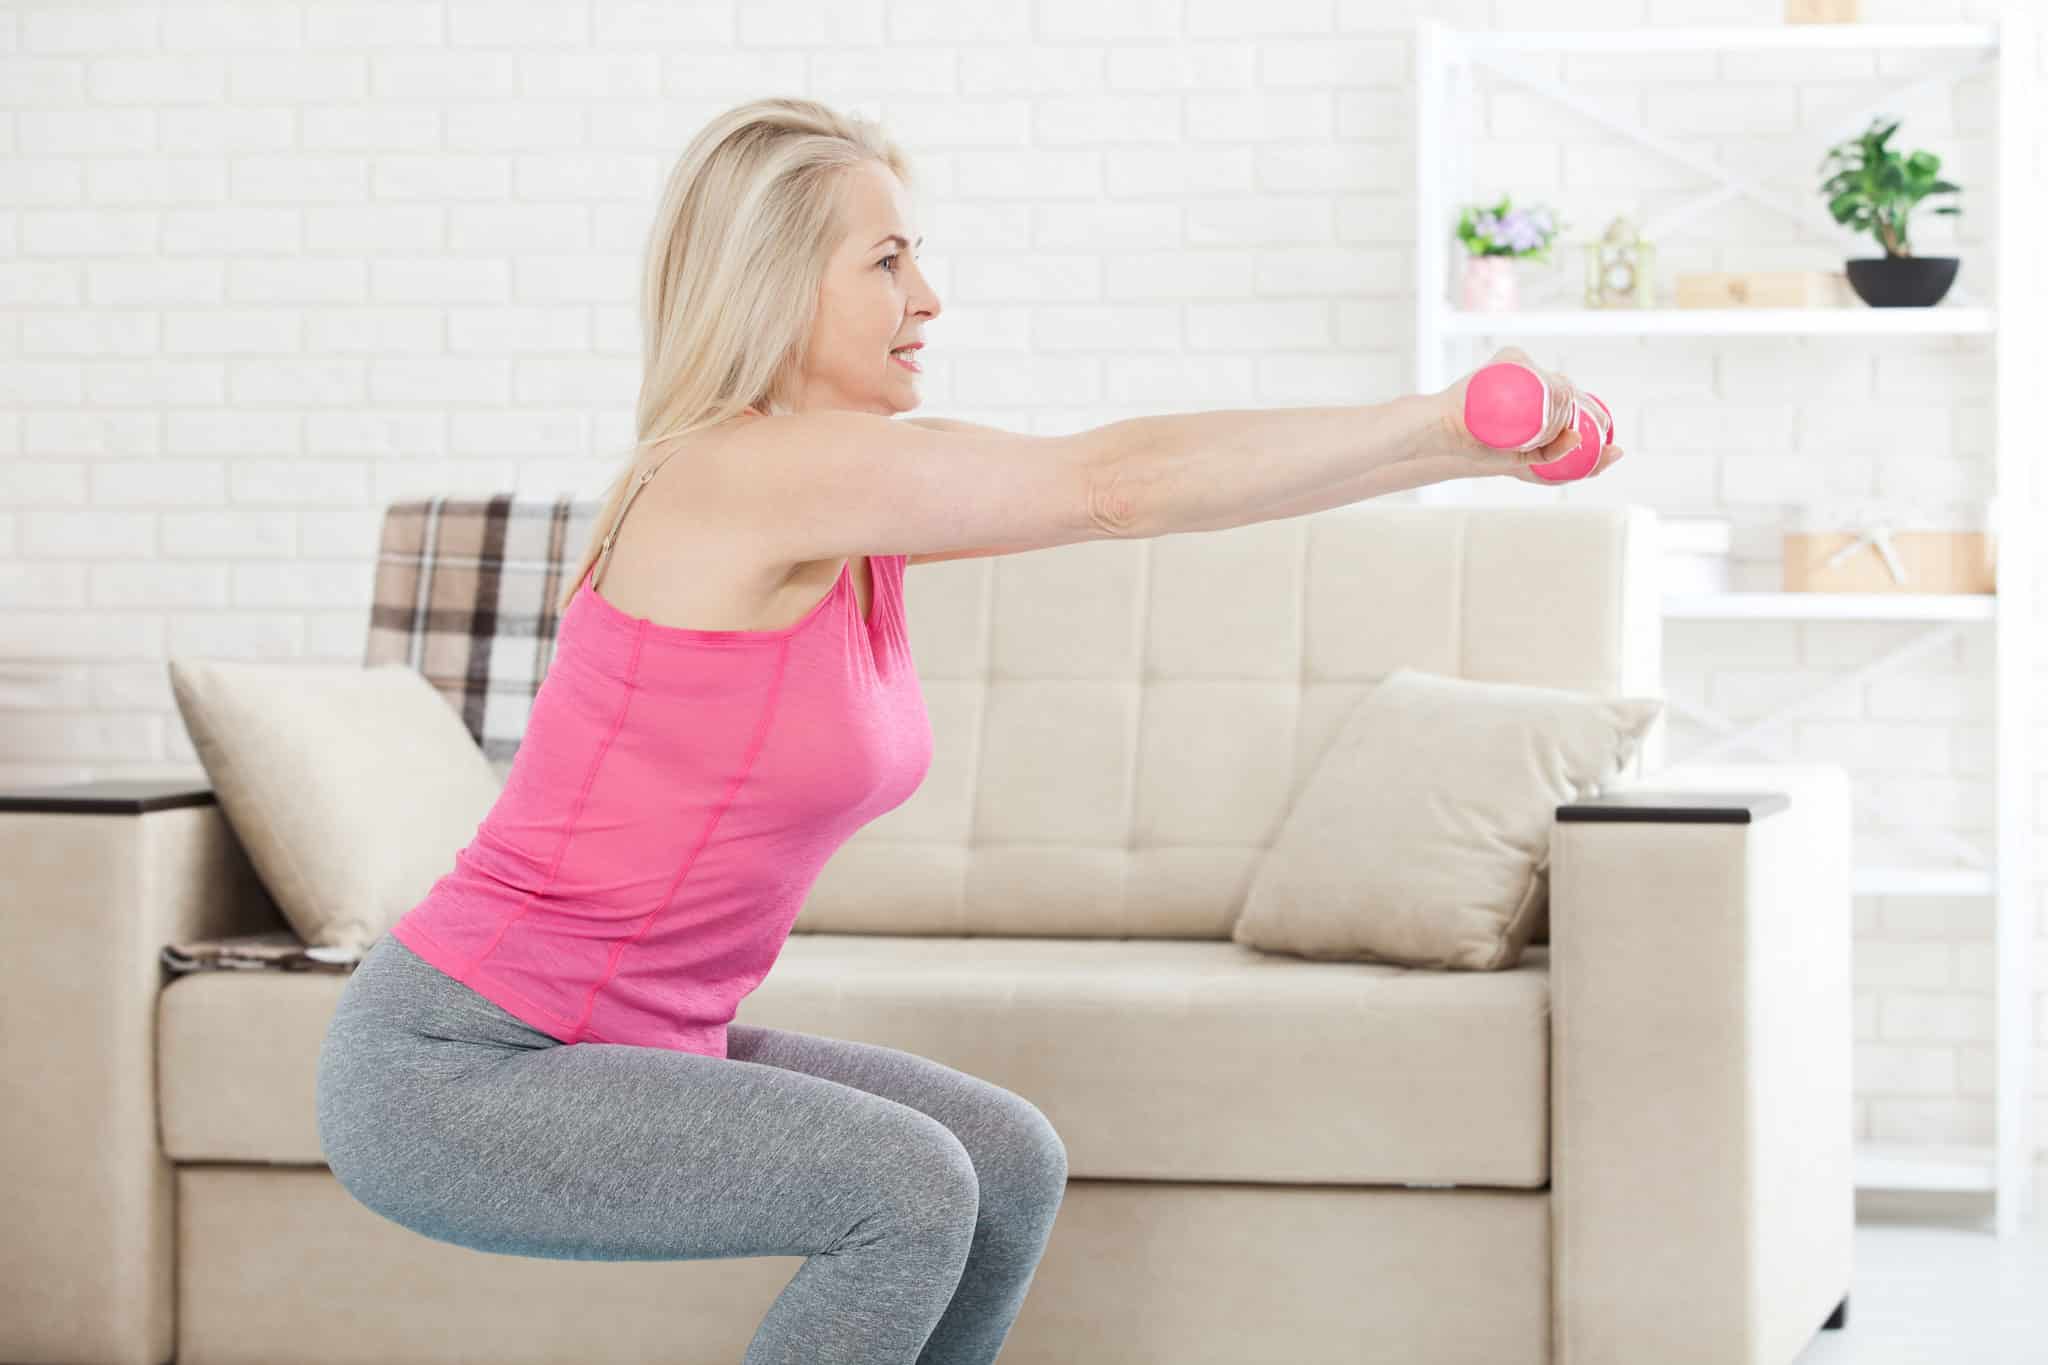 Woman over 50 holding dumbbells and squatting in living room for strength training session